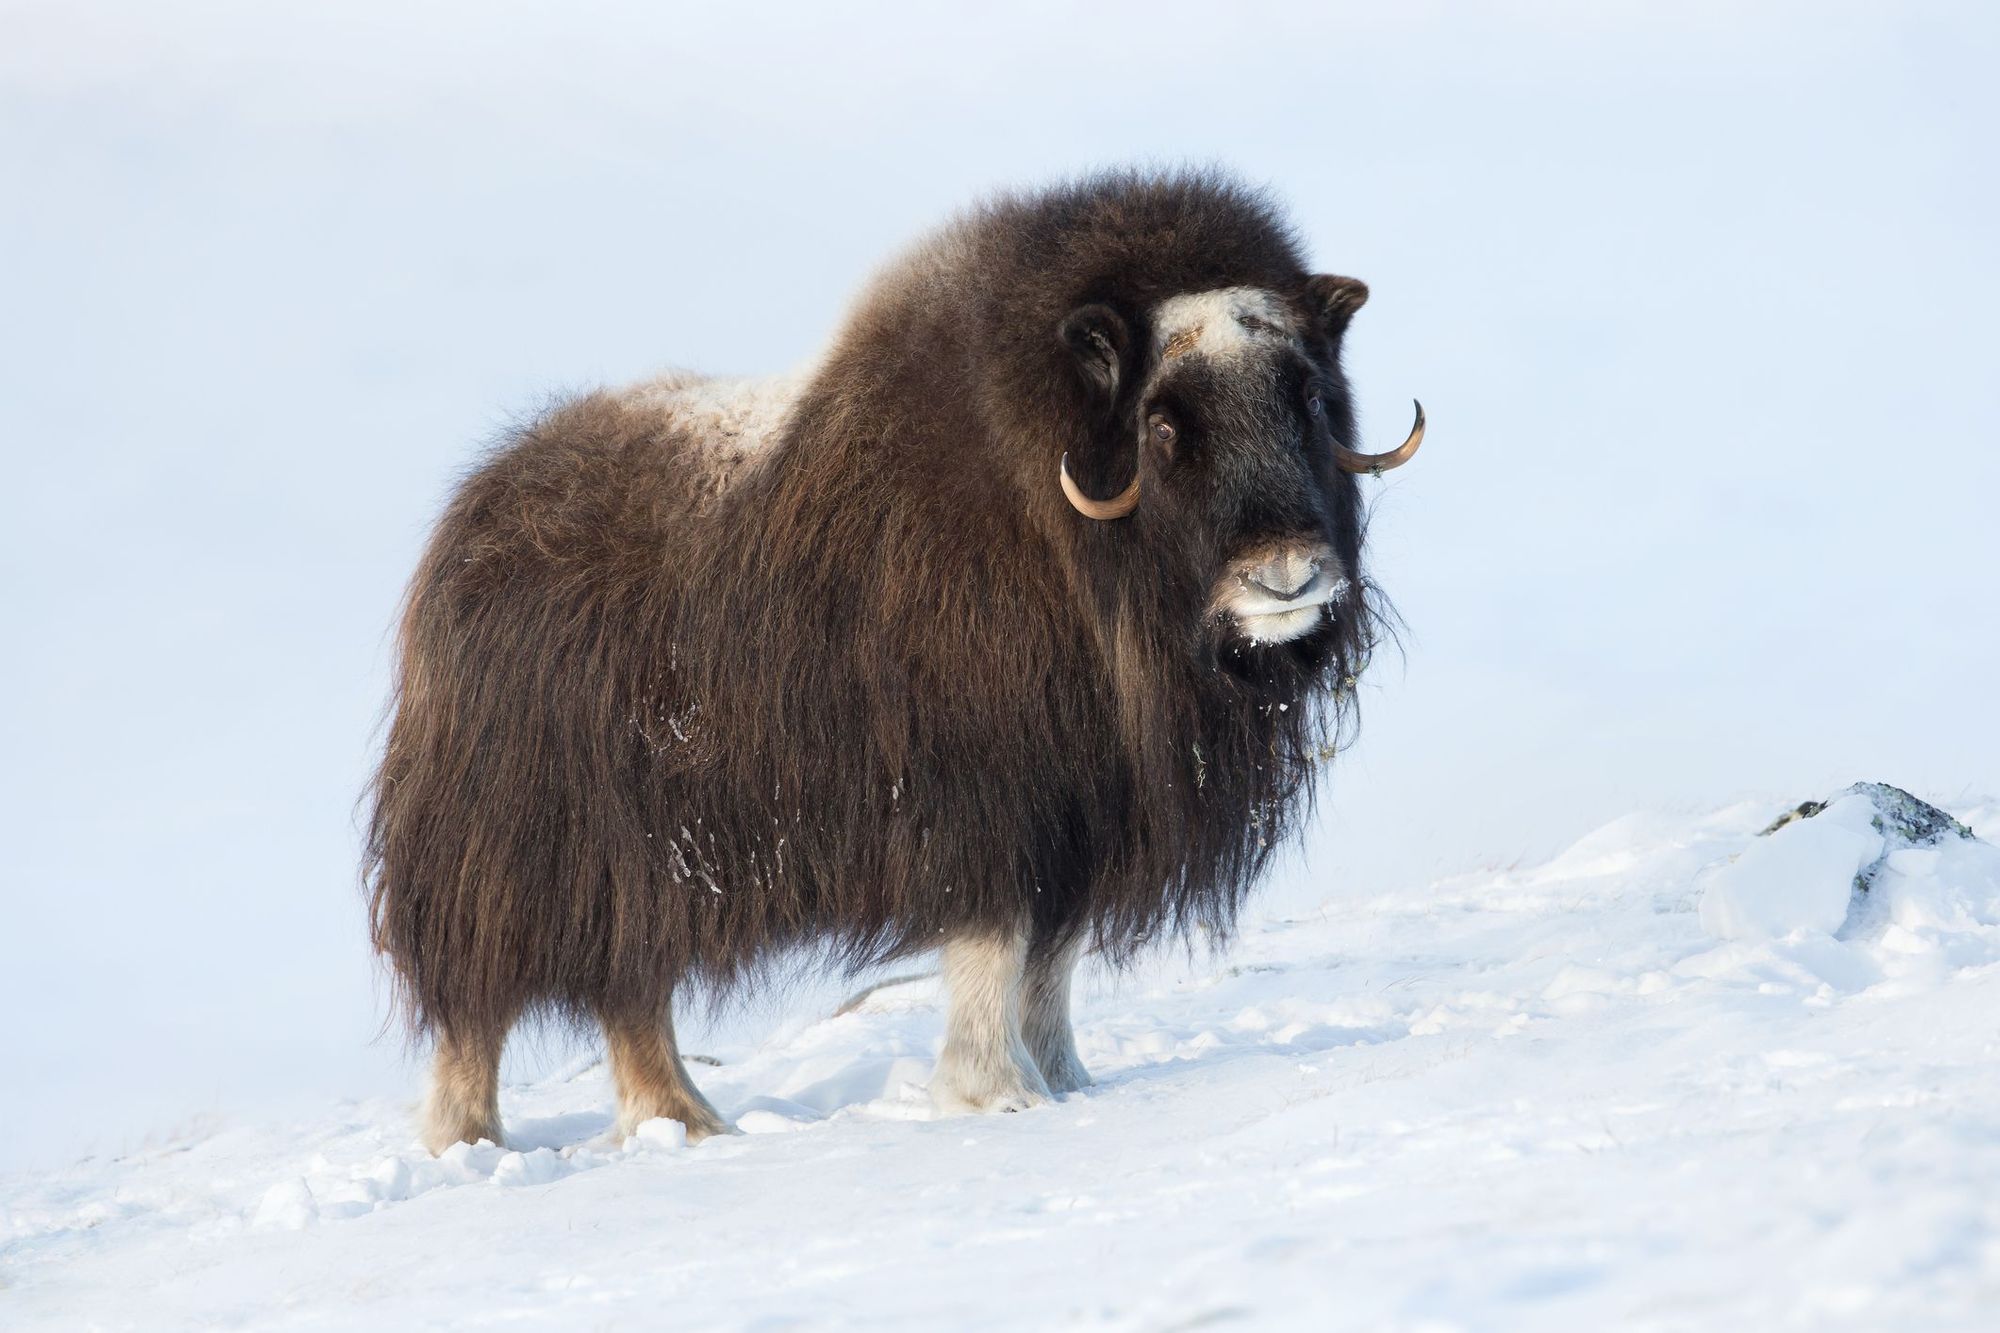 A musk ox in the snowy landscape of Dovrefjell National Park.